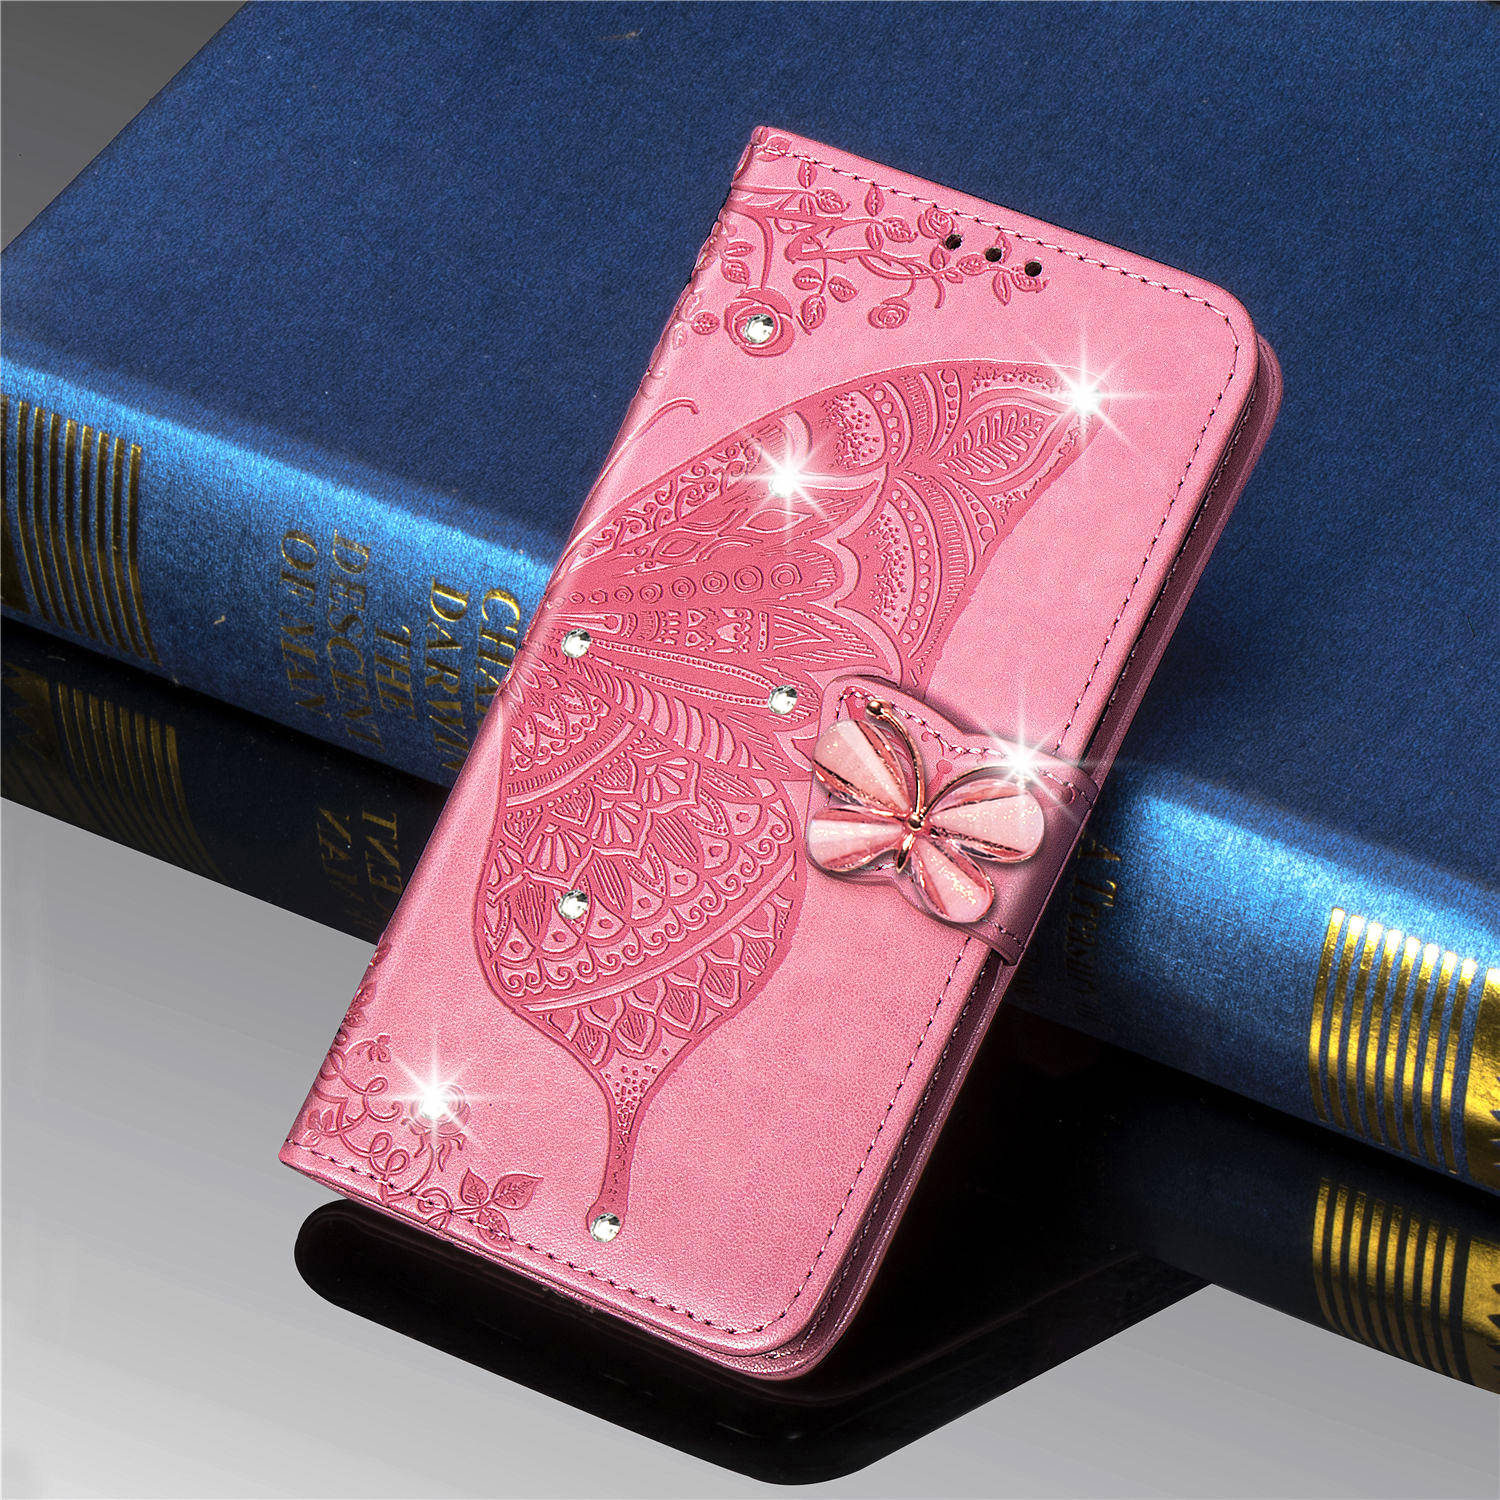 

Flip Book Leather Case For Samsung Galaxy M31 S A21S A10 A20 A40 A51 A71 A70 A7 J4 J6 S8 S9 S20 FE Phone wallet Butterfly cover, Rose gold